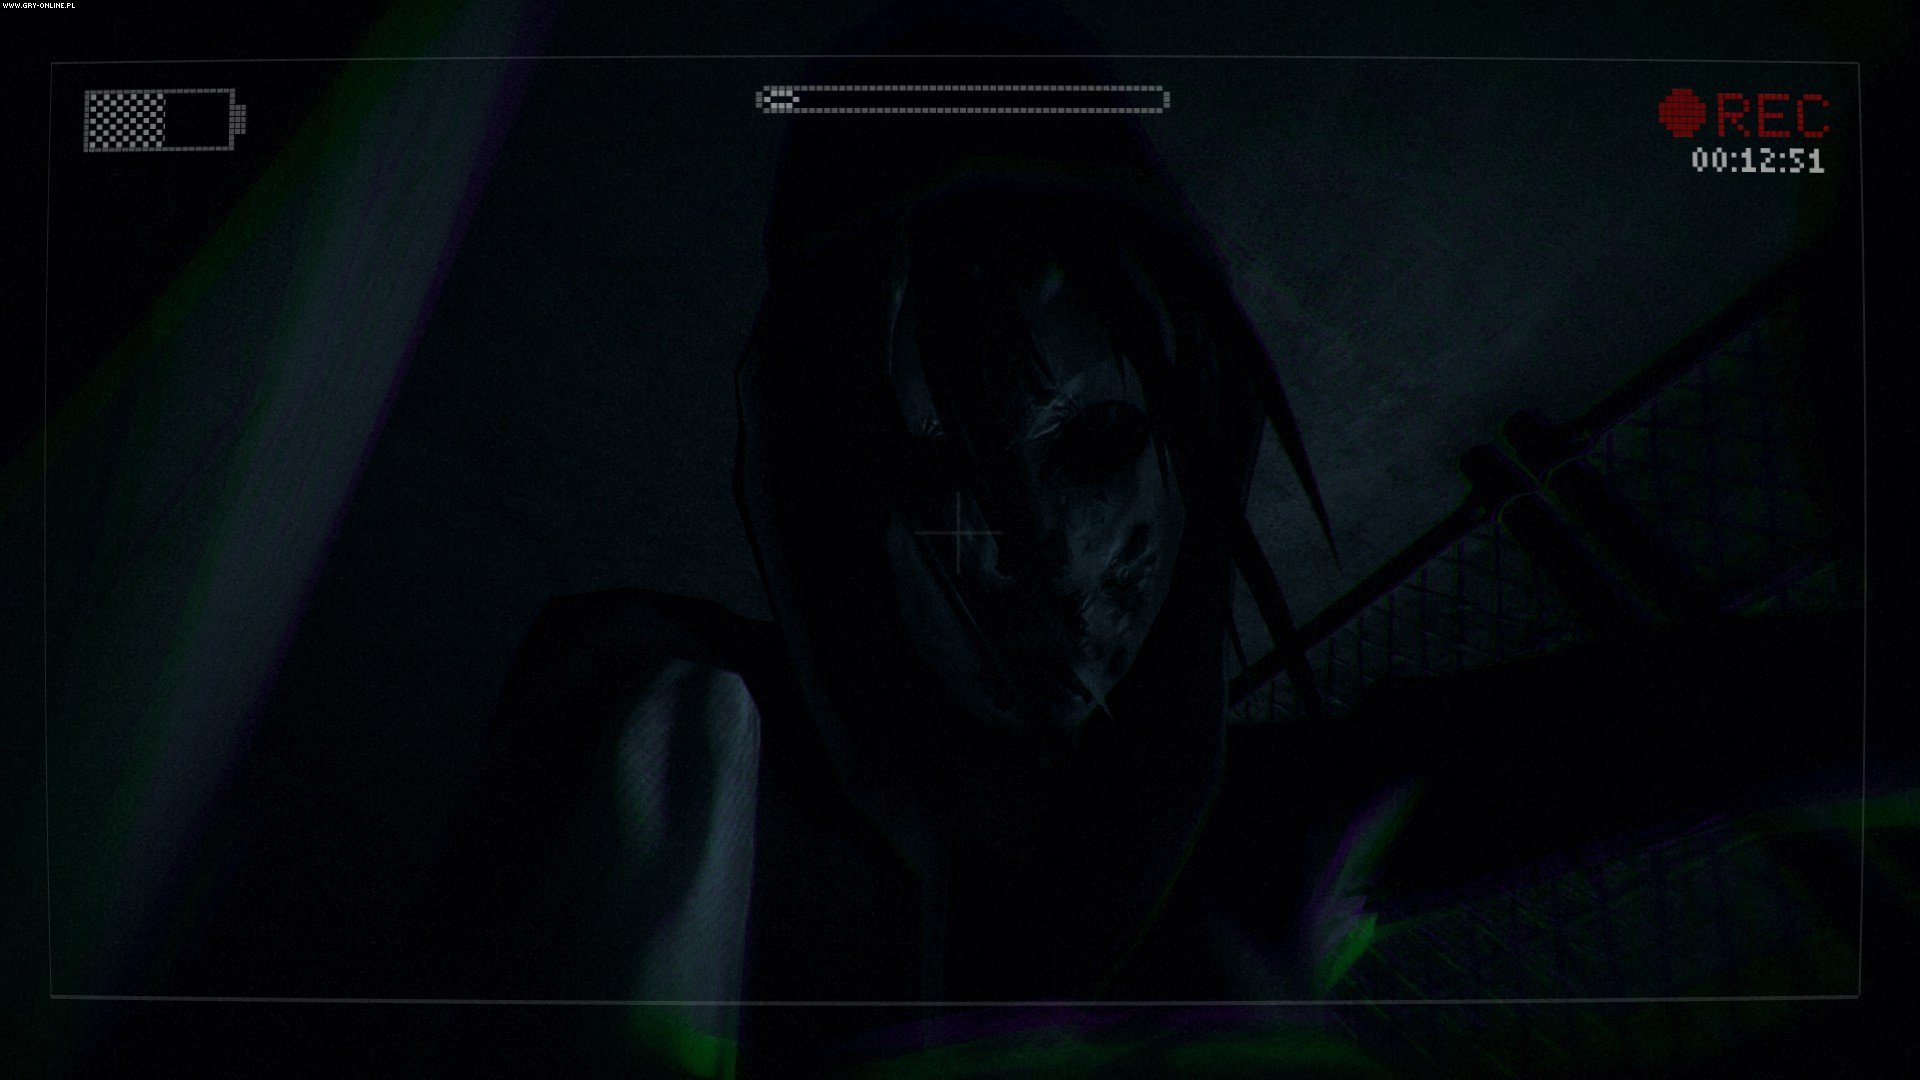 Slender: The Arrival Backgrounds, Compatible - PC, Mobile, Gadgets| 1920x1080 px